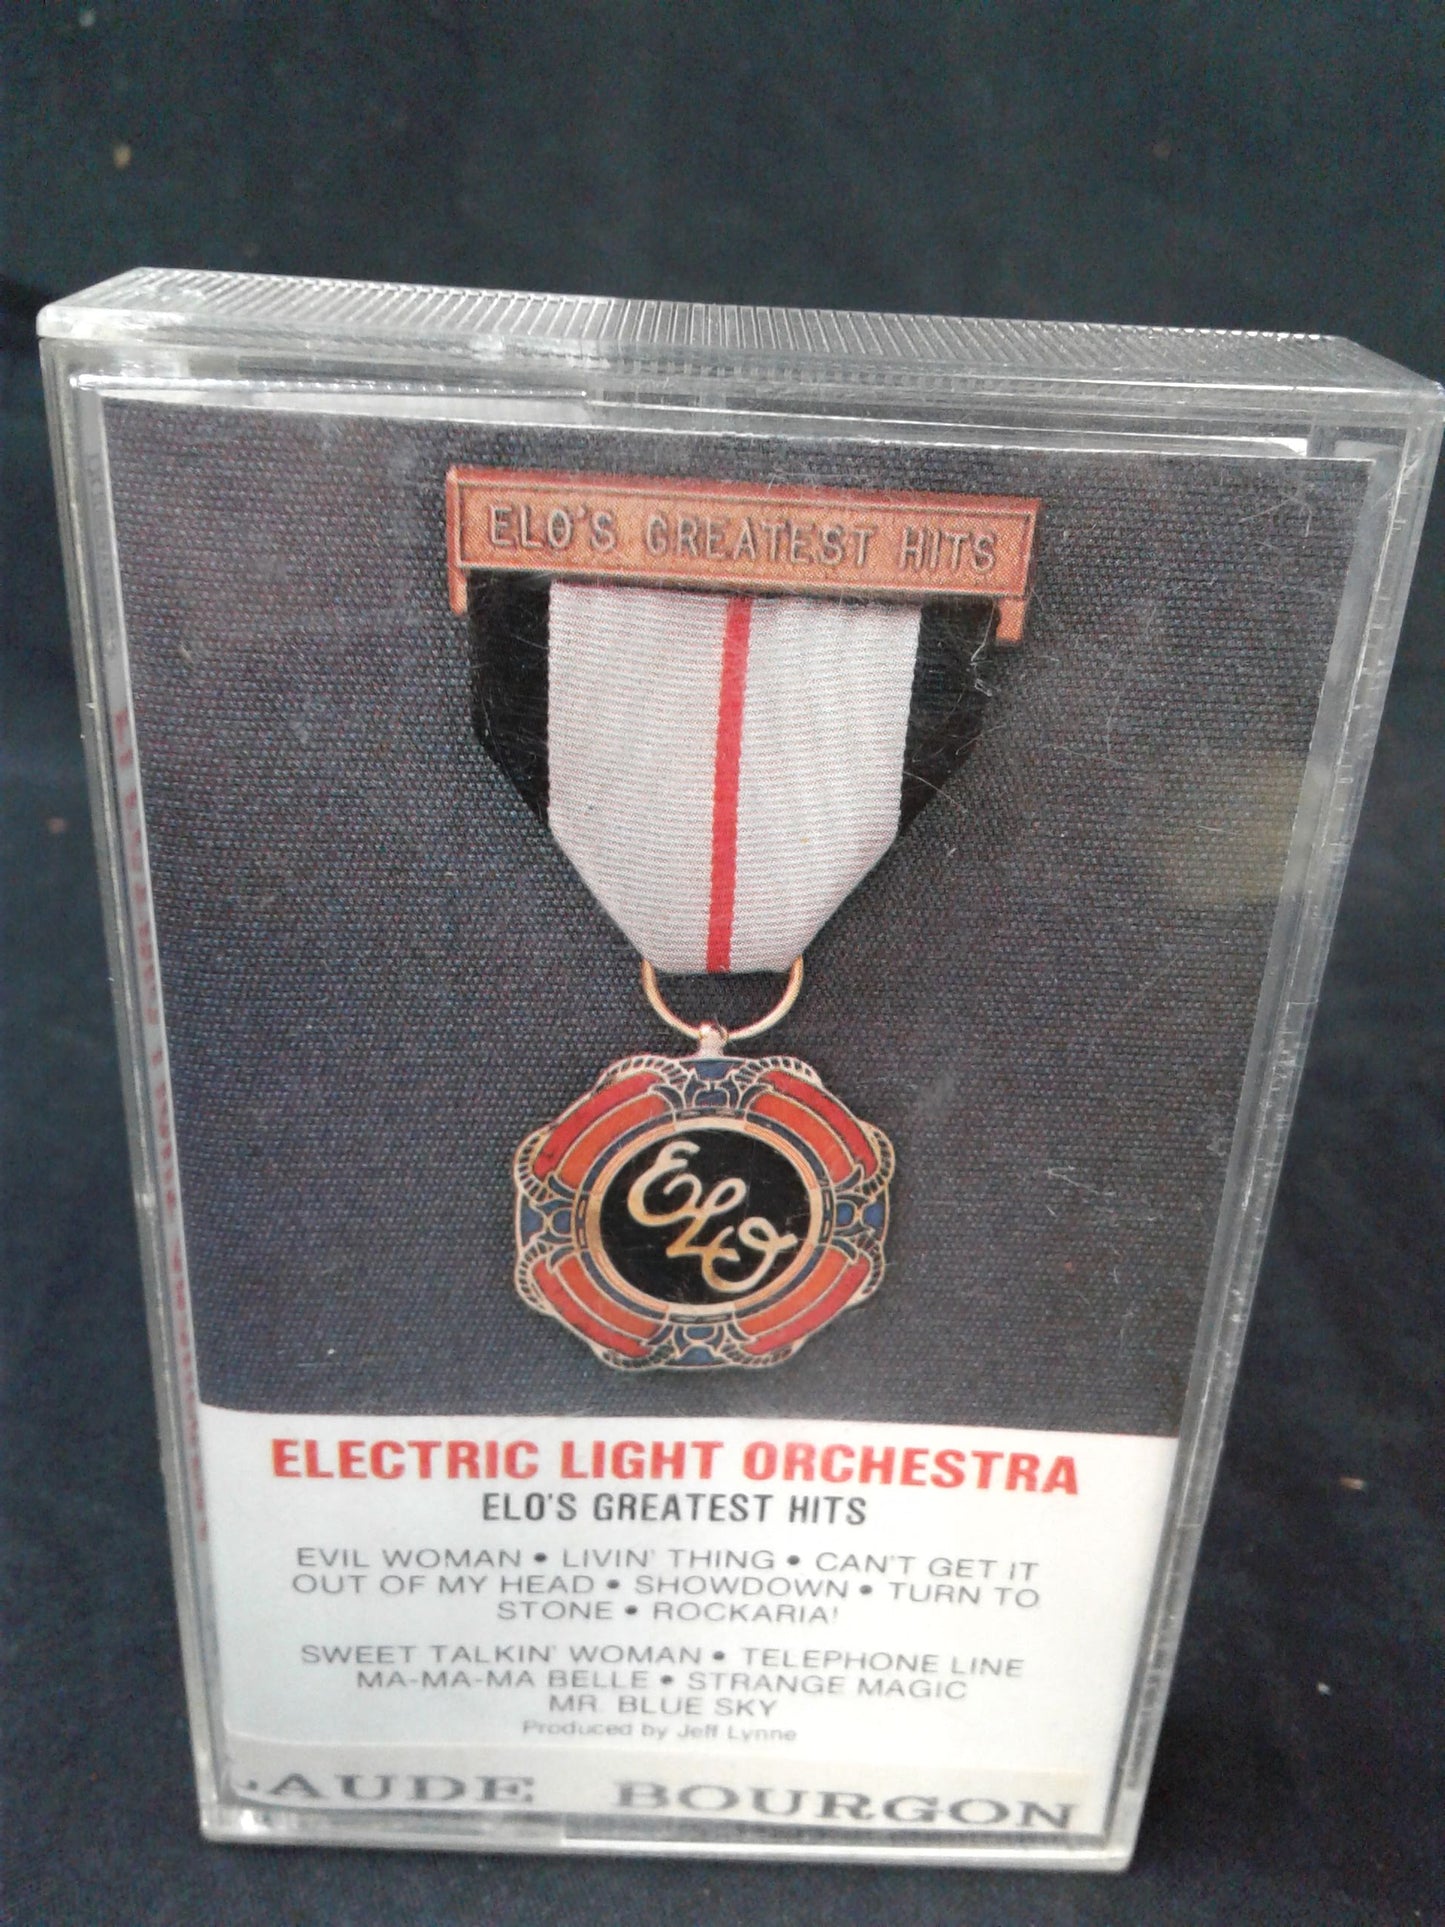 Electric light orchestra Elo's greatest hits